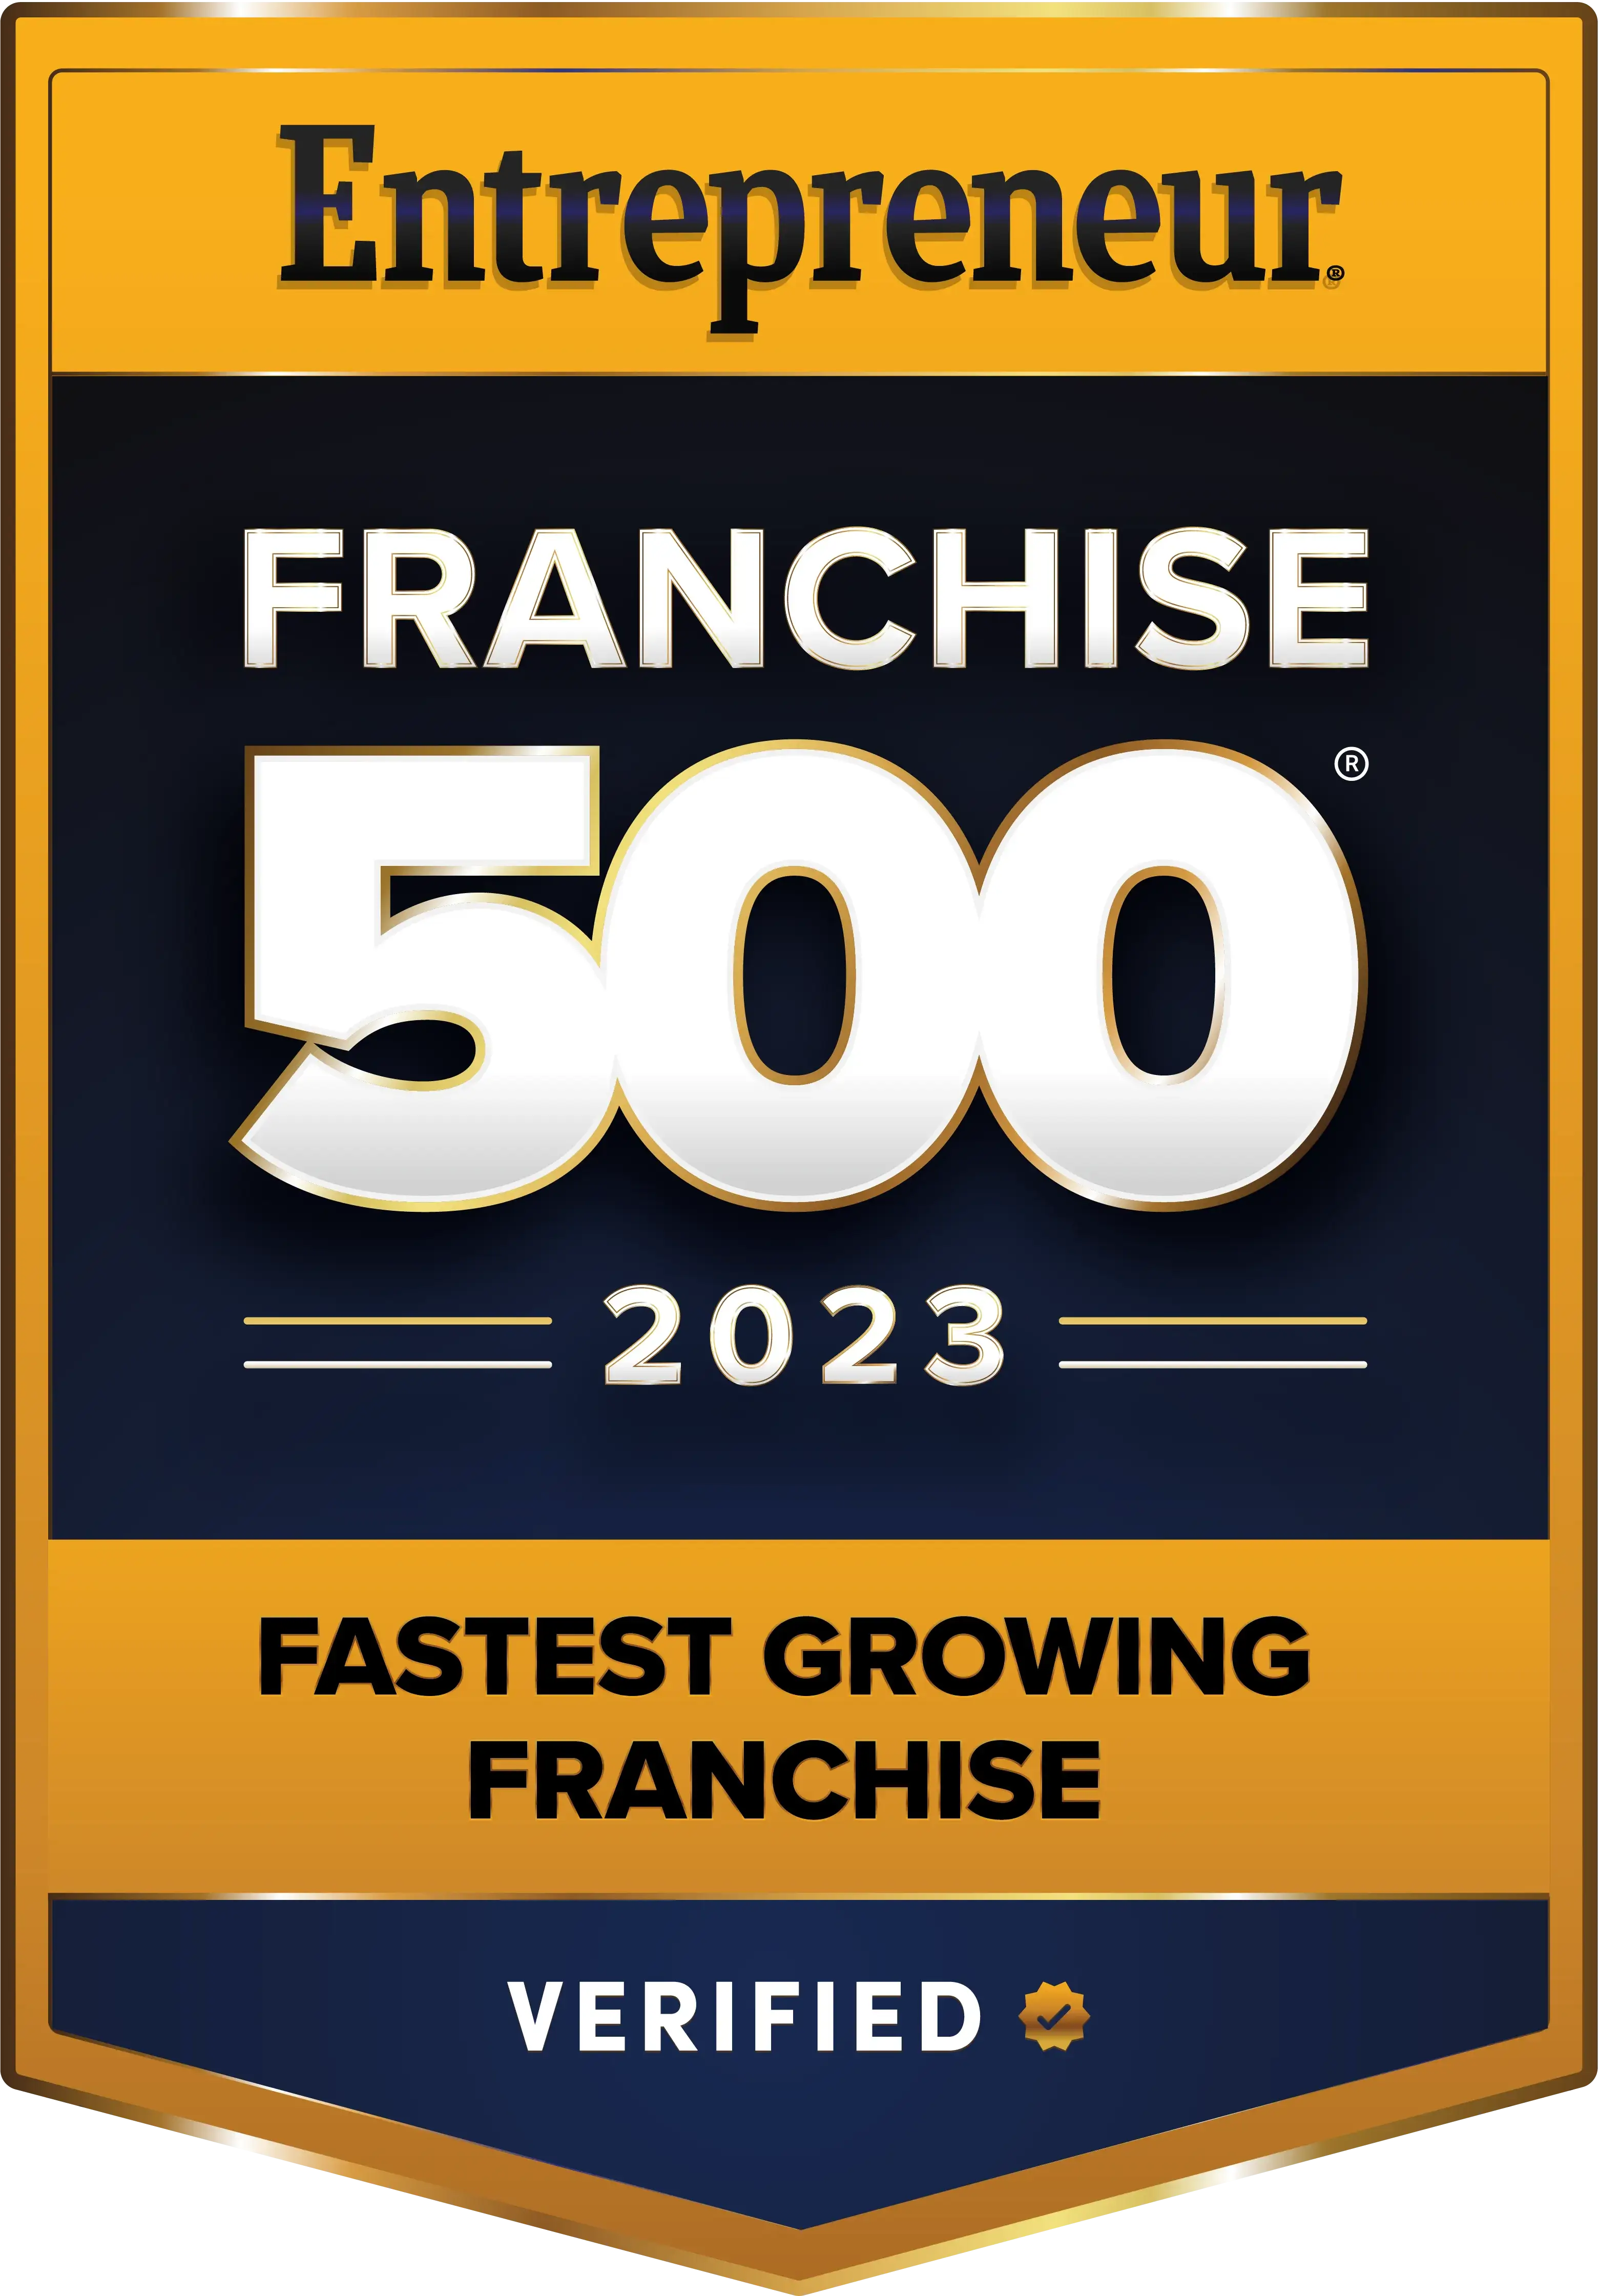 Franchise 500 Fastest Growing - 2023